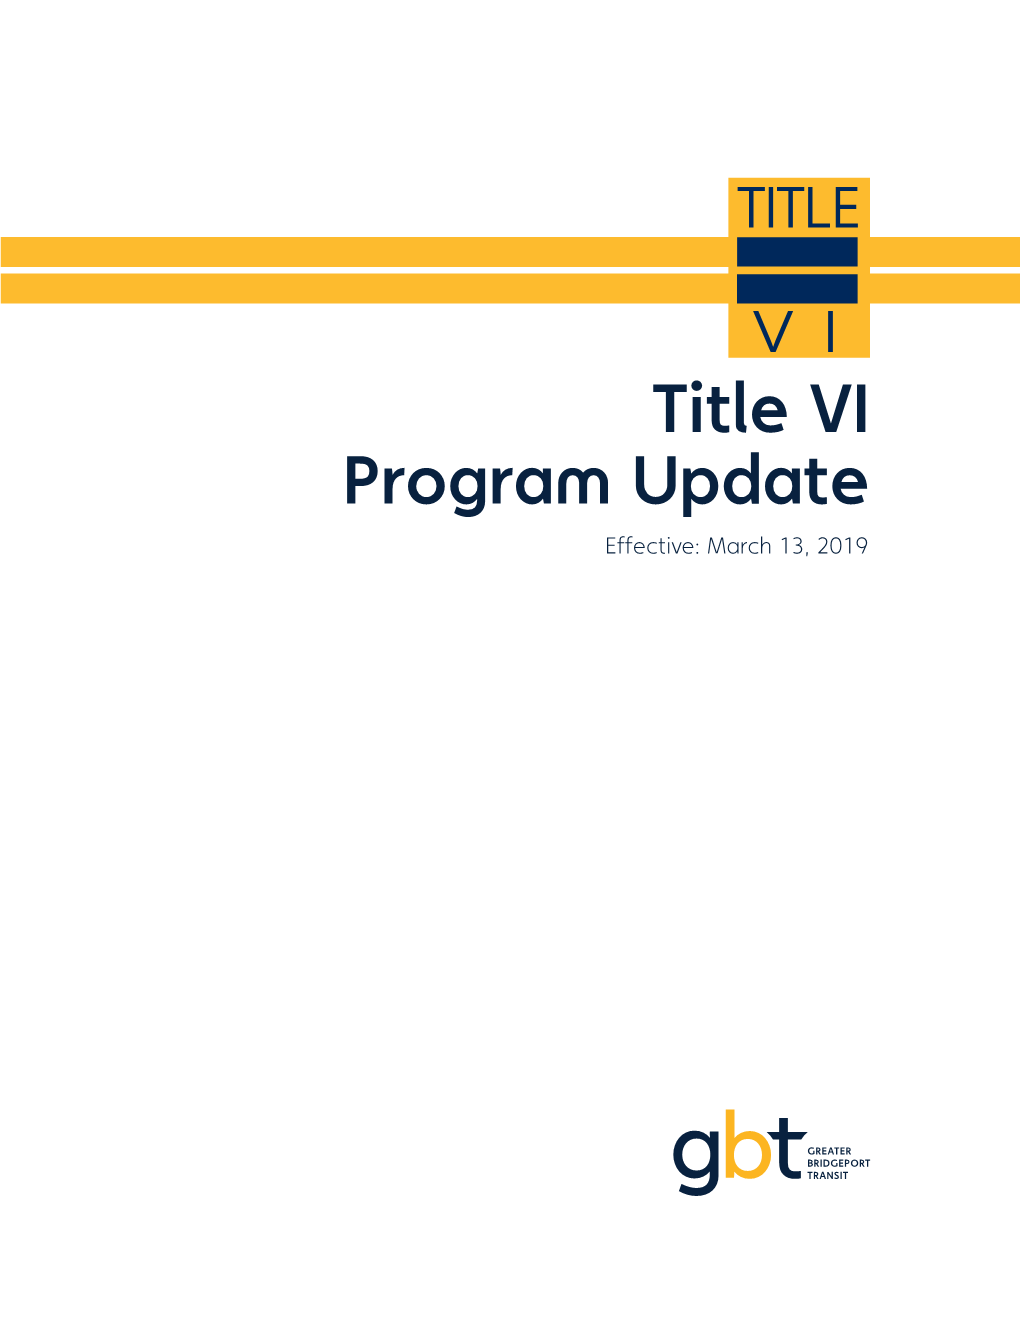 To View GBT's Complete Title VI Plan